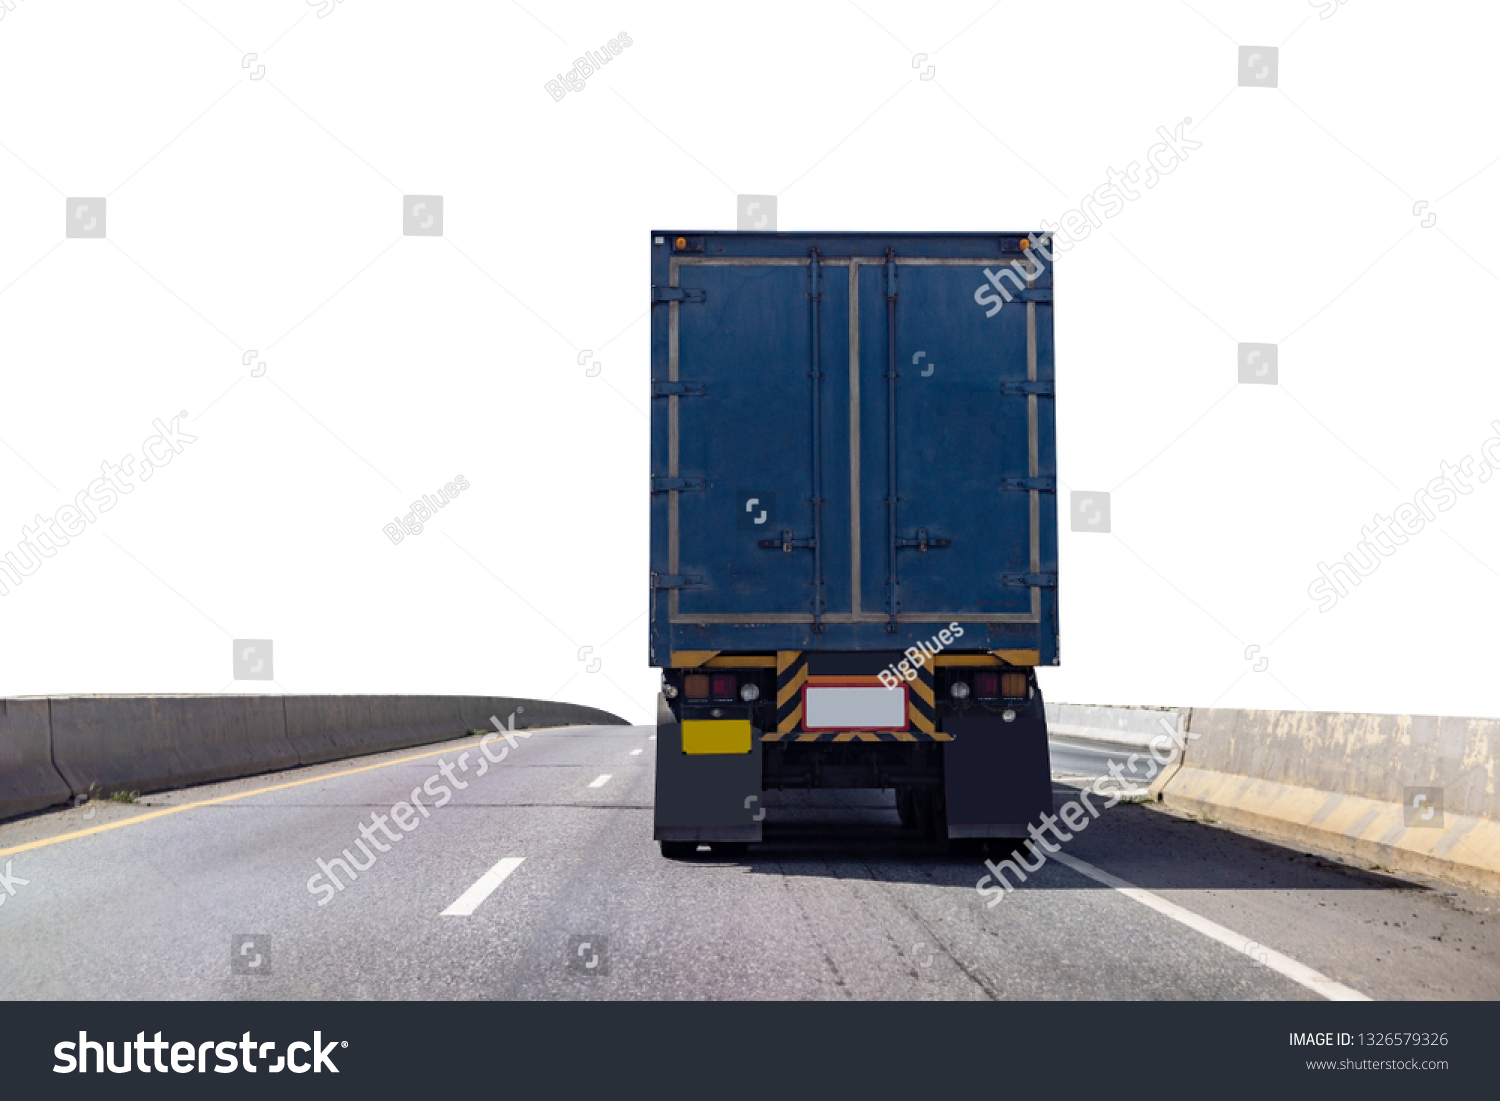 Back view of Truck on road with blue container, transportation concept,import,export logistic industrial Transporting Land transport on the expressway.on white background #1326579326